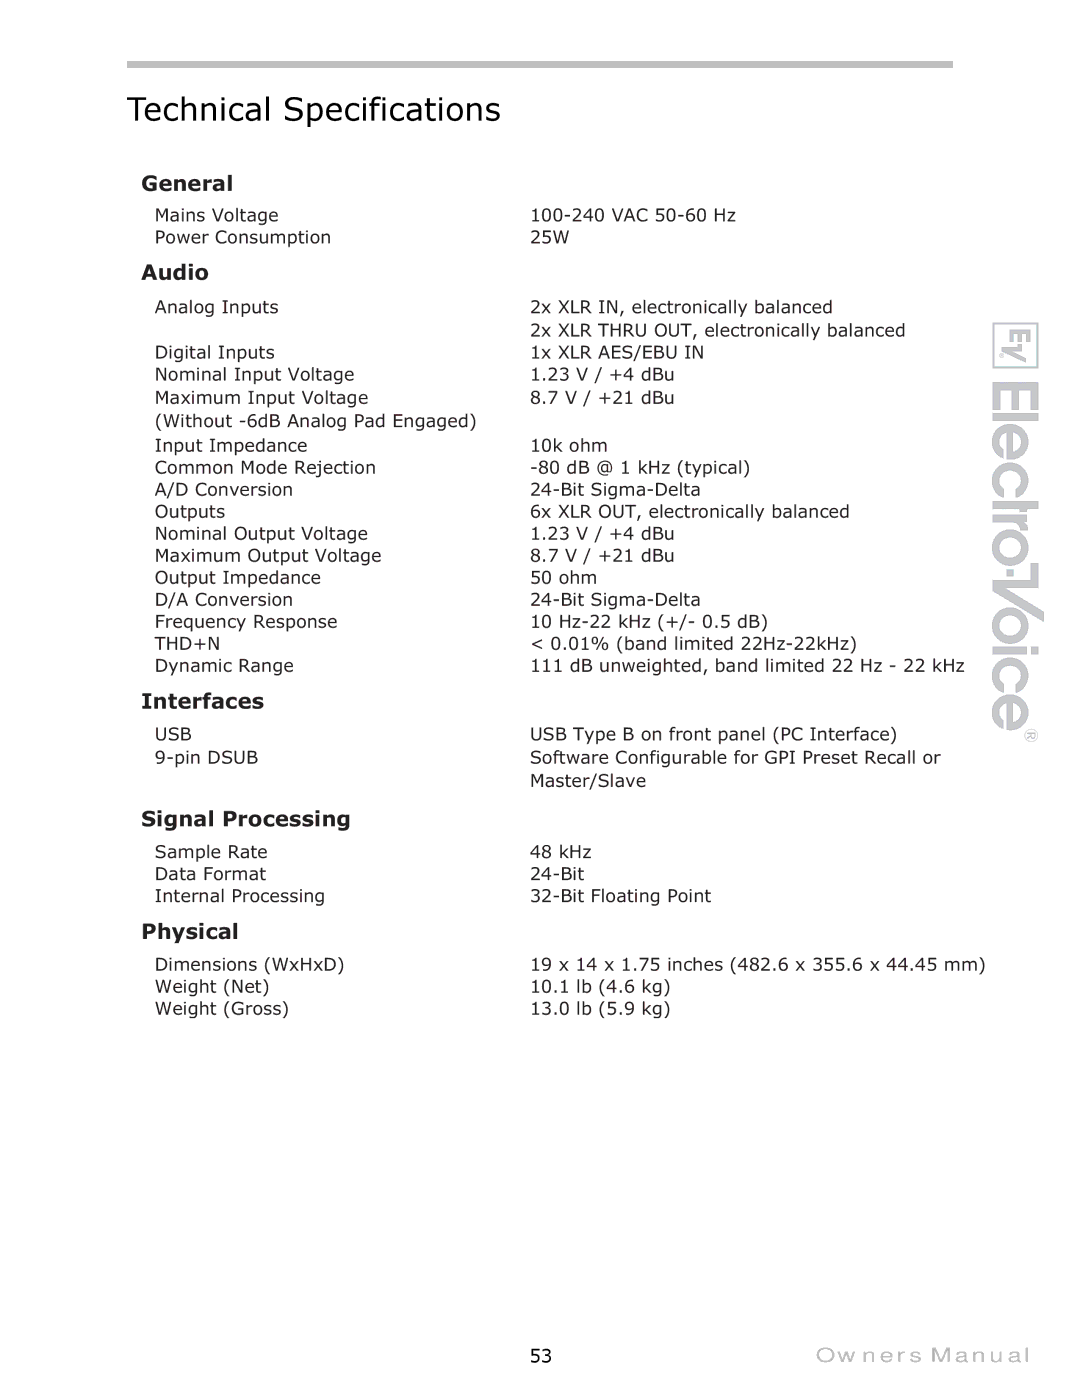 Electro-Voice Speaker System owner manual Technical Specifications, Audio 